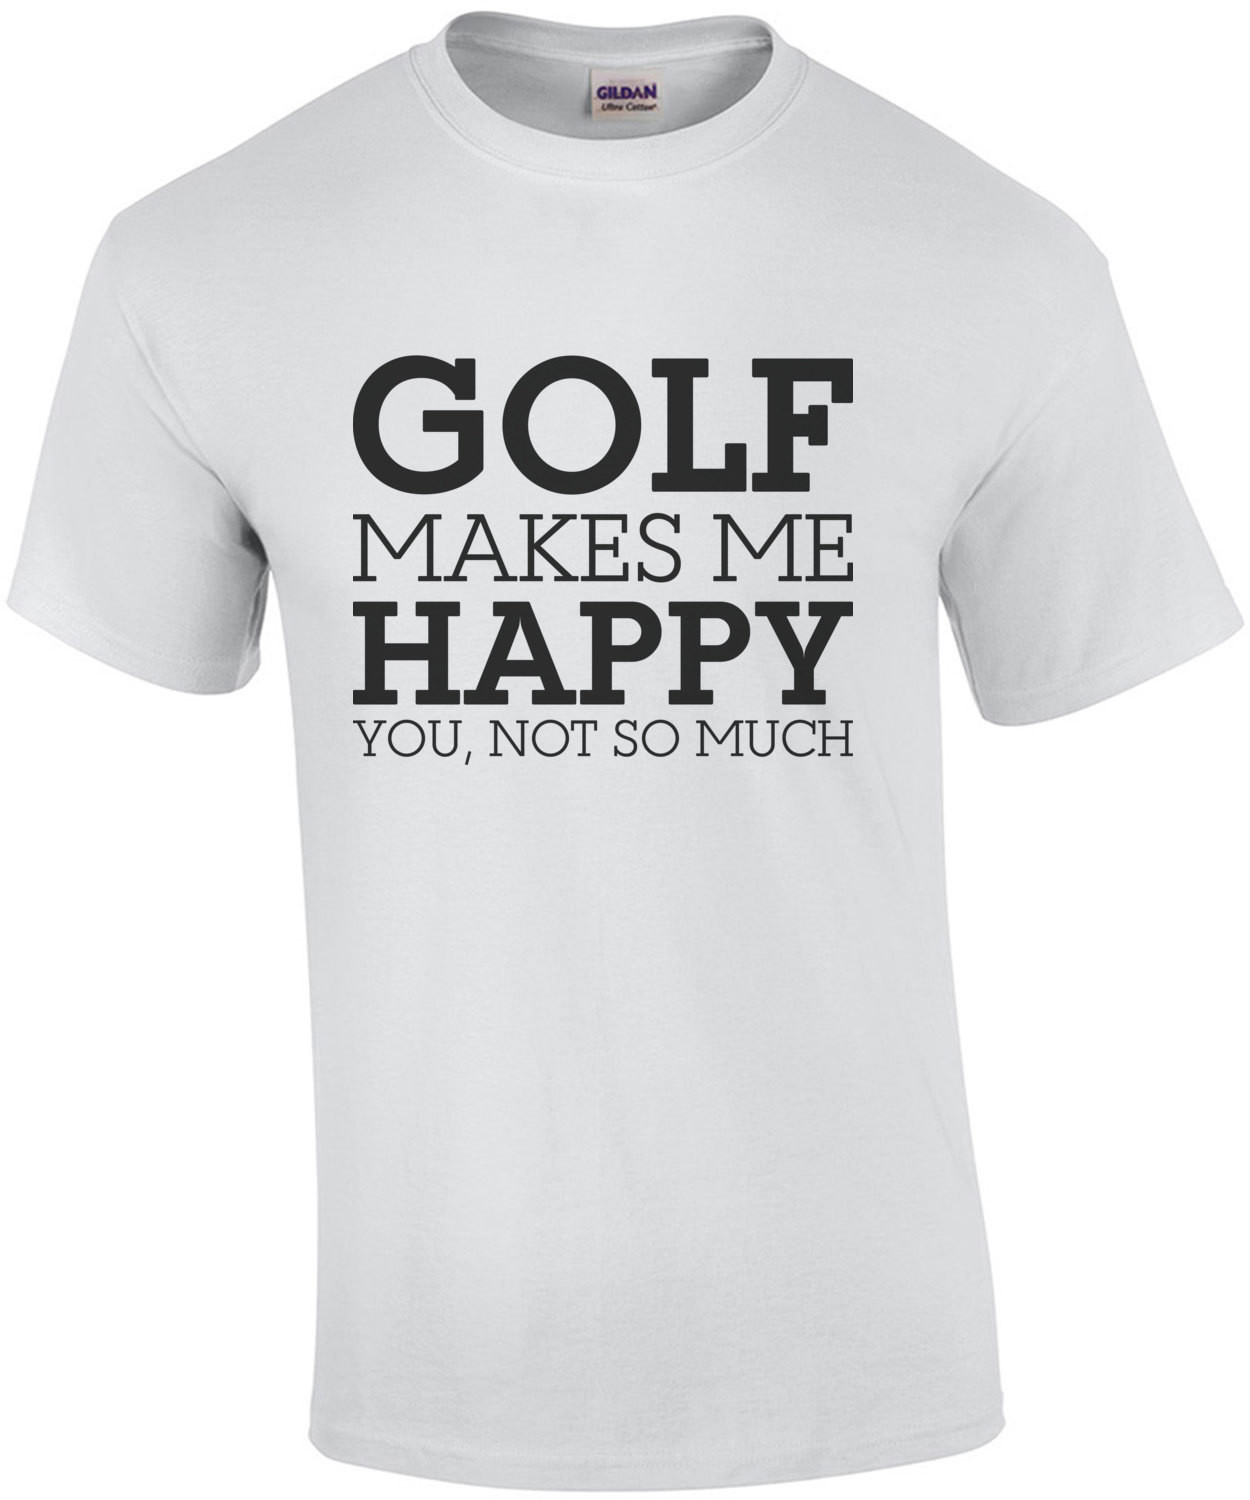 Golf makes me happy. You, not so much. Funny golf t-shirt